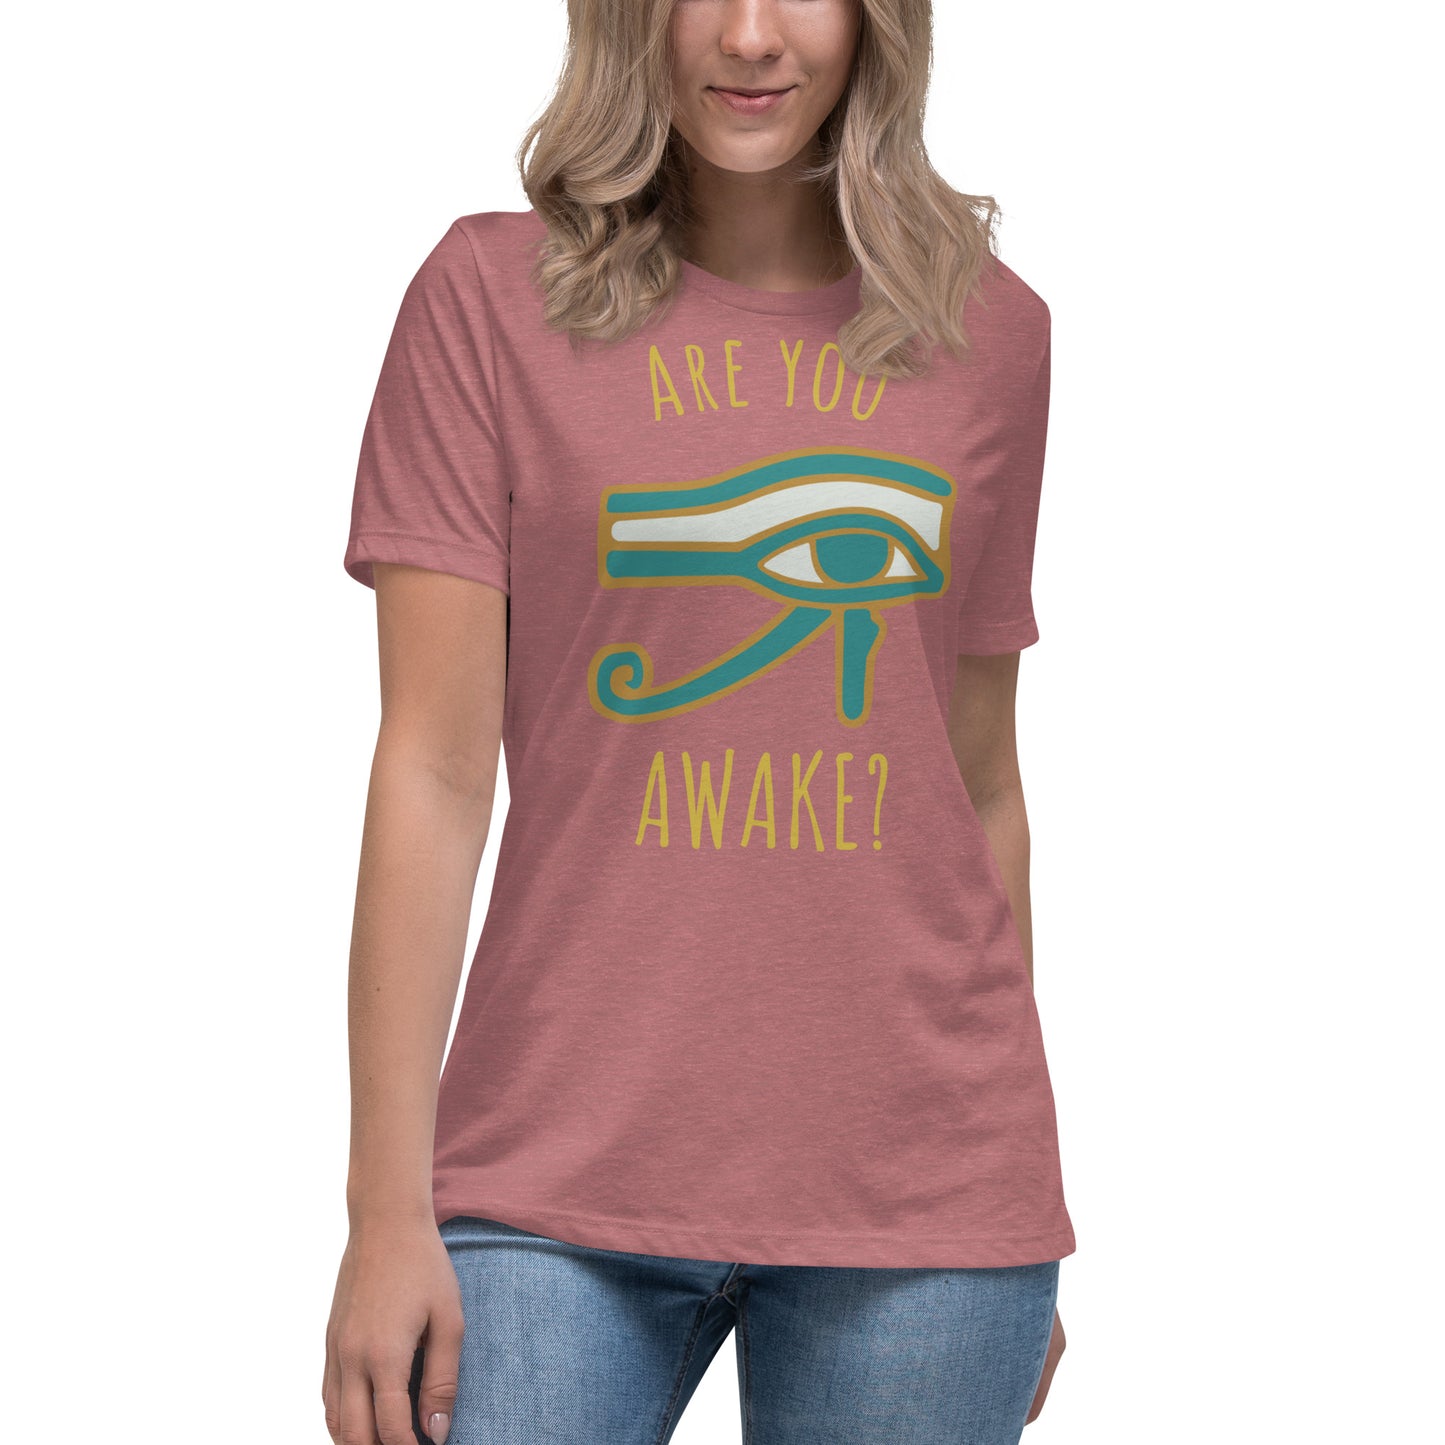 Are you AWAKE? Third Eye women's tee (gold lettering)